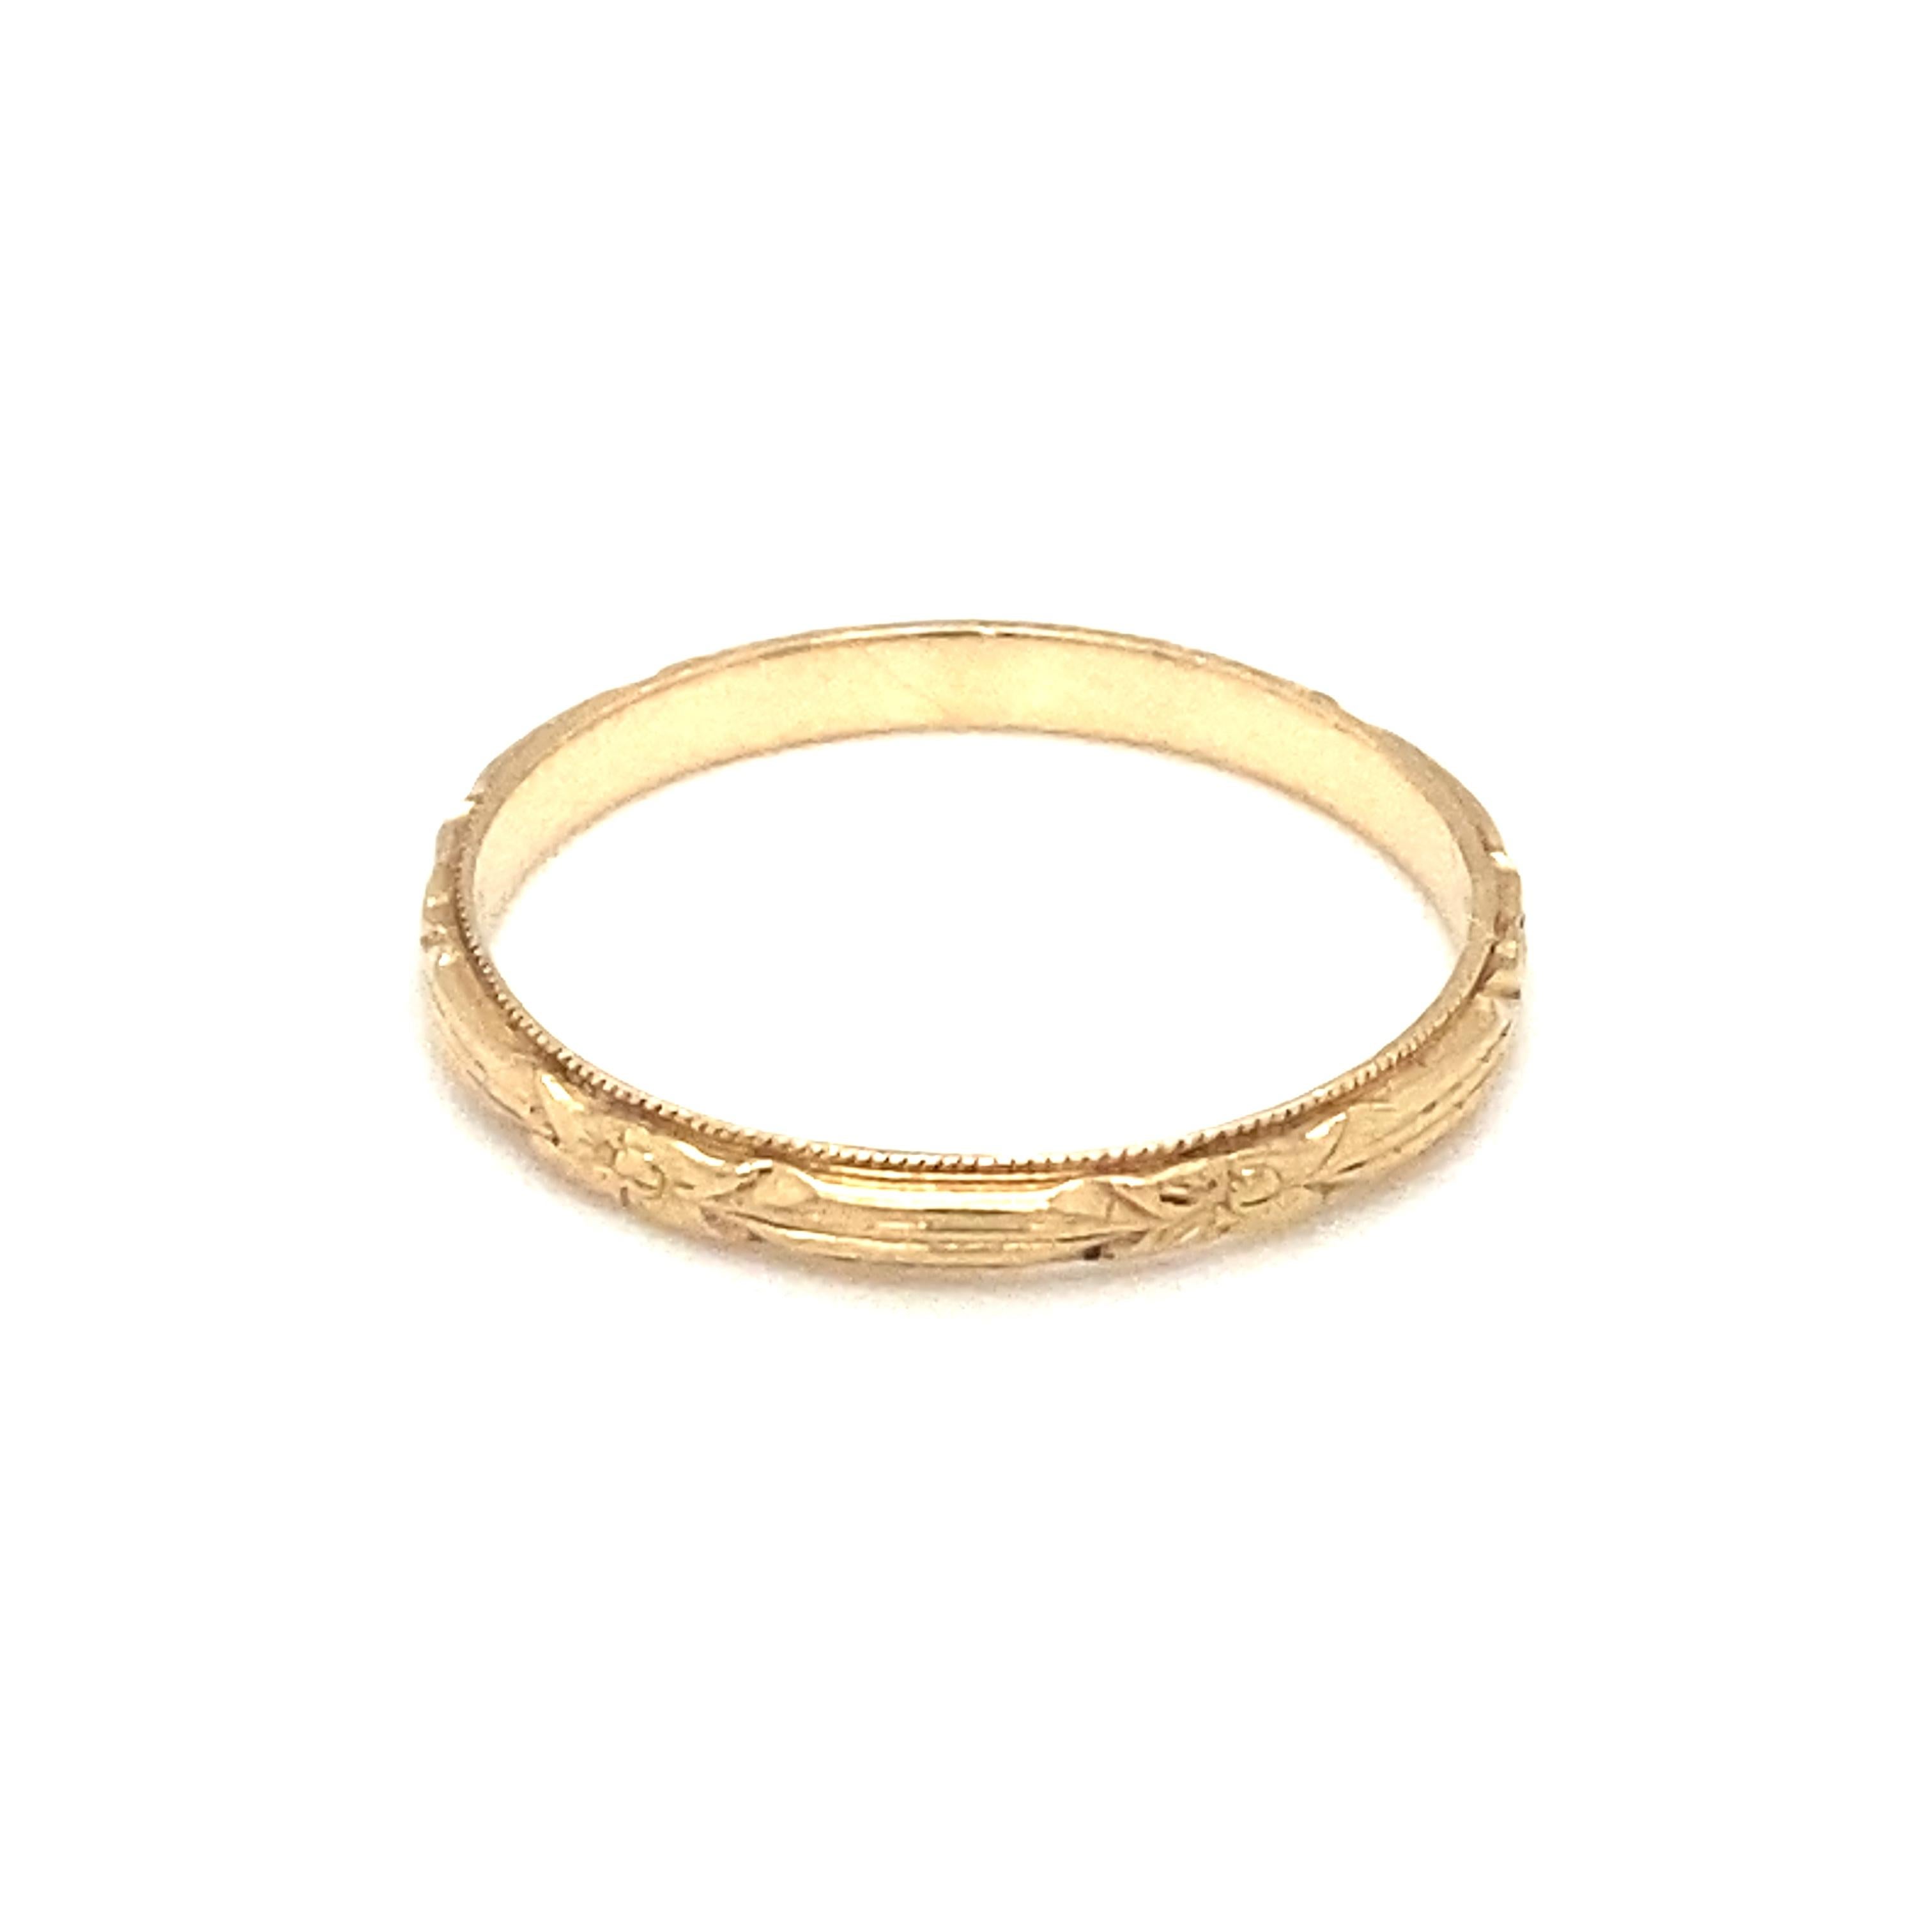 Item Details: This simple art deco wedding band from the 1920s has a geometric floral design etched into it.

Circa: 1920s
Metal Type: 14 karat yellow gold
Weight: 1.2 grams
Size: US 6